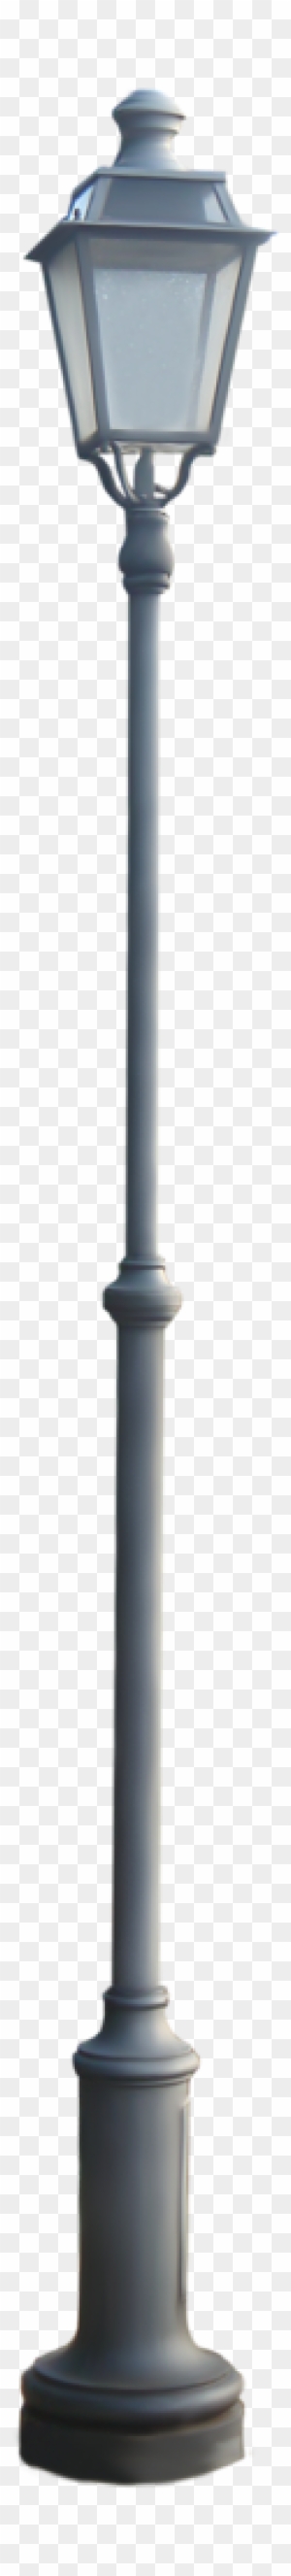 Lamp Post Clipart Tall Lamp - Cut Out Street Lamp